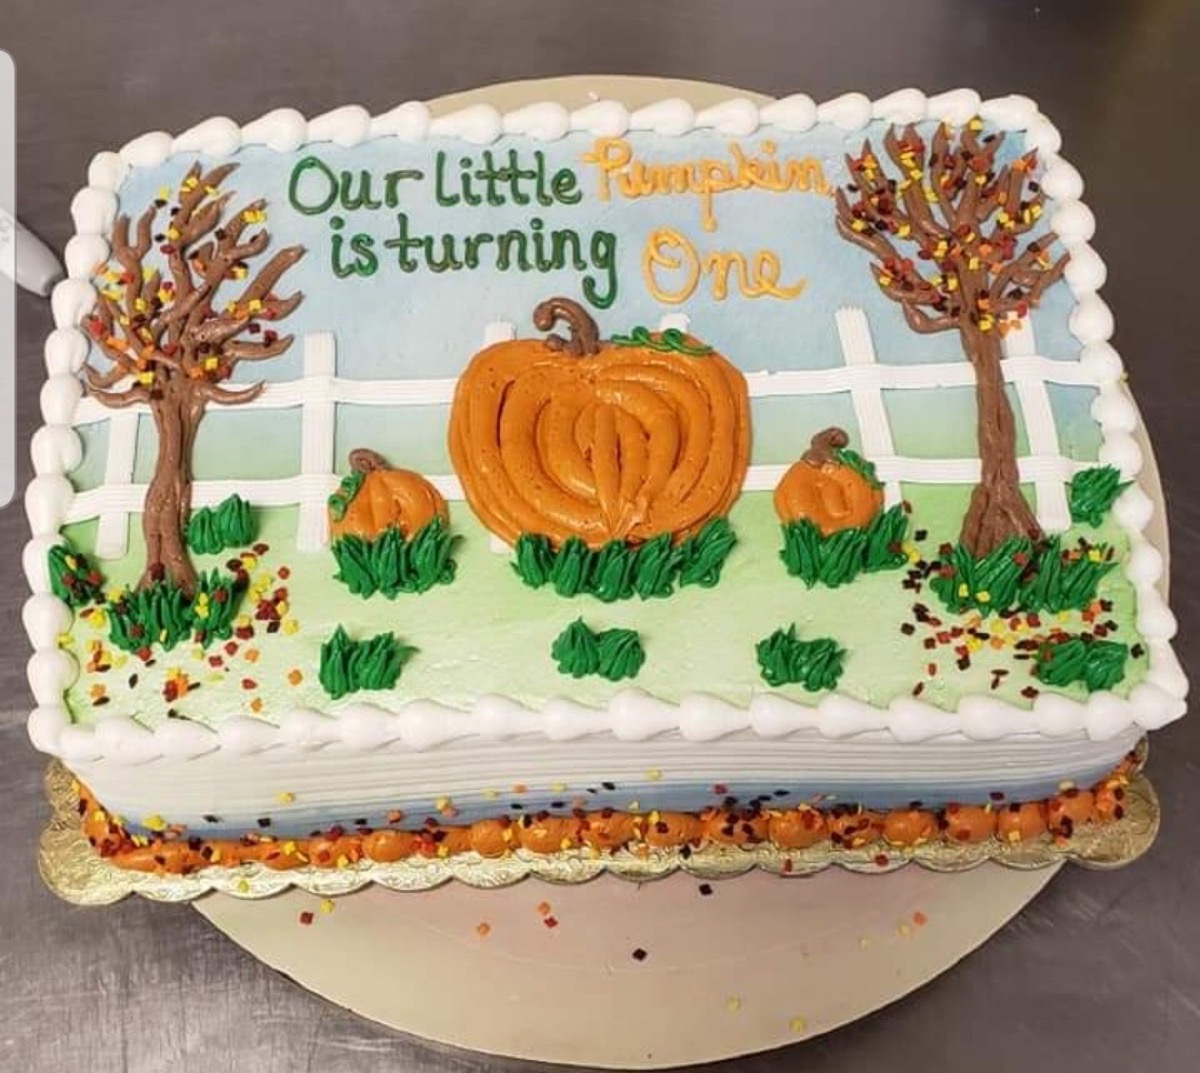 Christine's Cakes & Pastries - Our Little Pumpkin in Turning 1